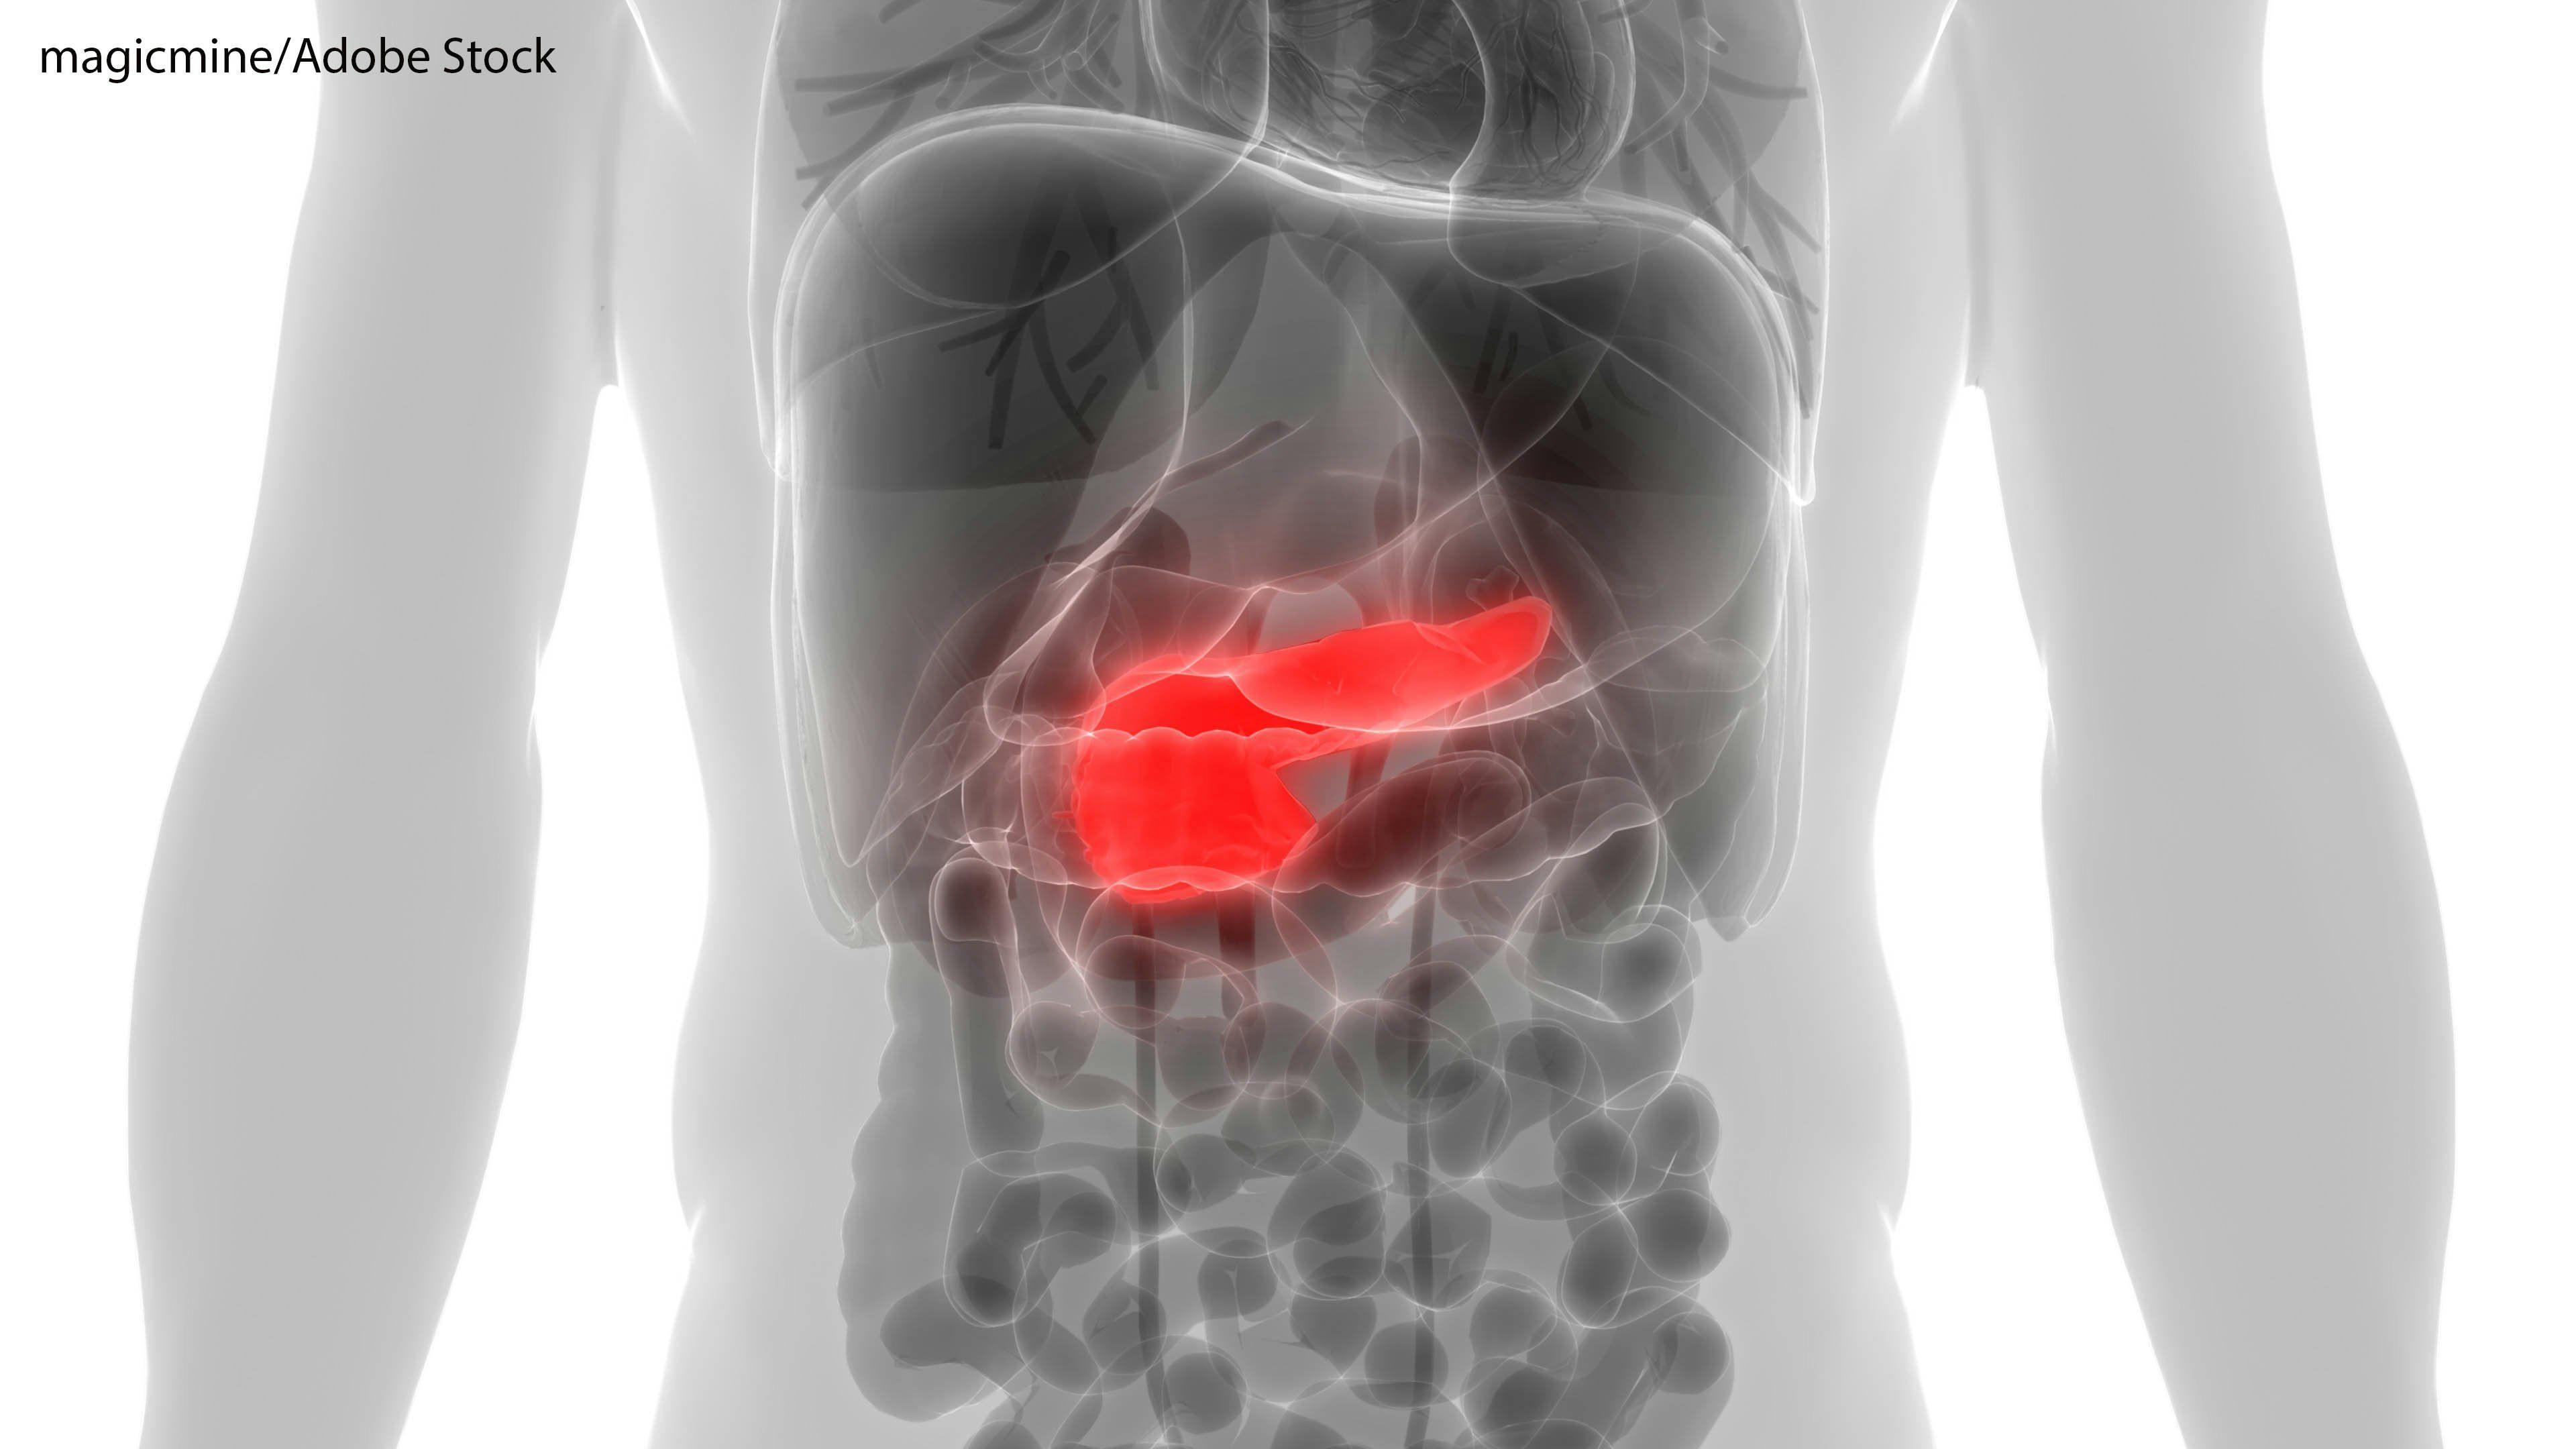 Stereotactic Body Radiation Therapy Improves OS for Locally Advanced Pancreatic Cancer